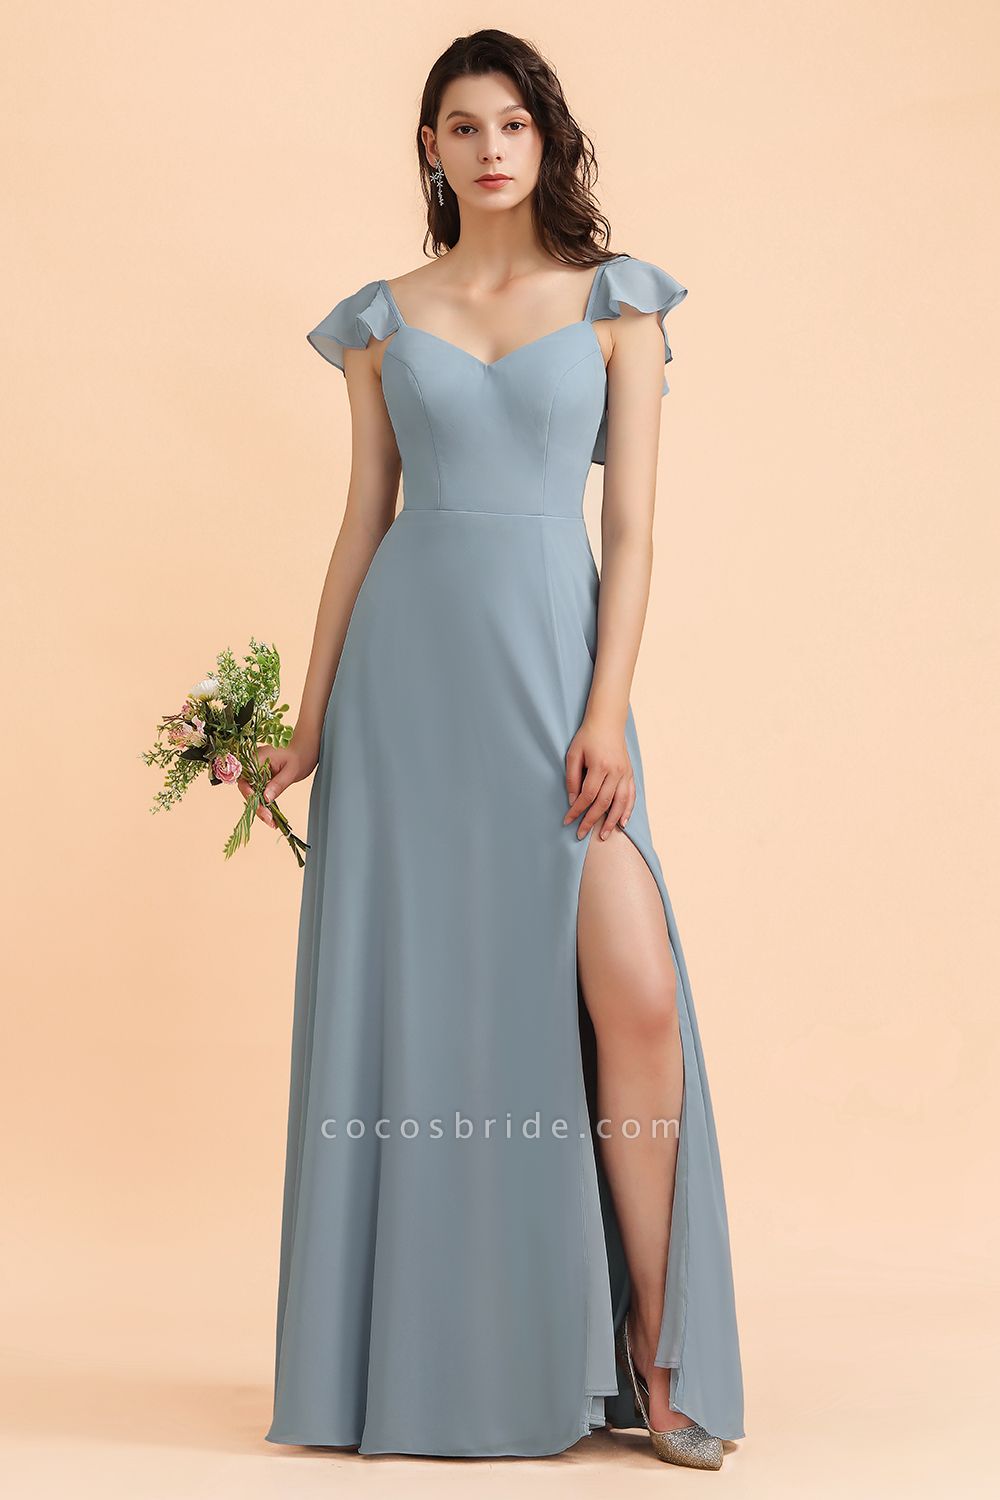 Chic Sweetheart A-Line Backless Chiffon Bridesmaid Dress With Side Slit Bowknot